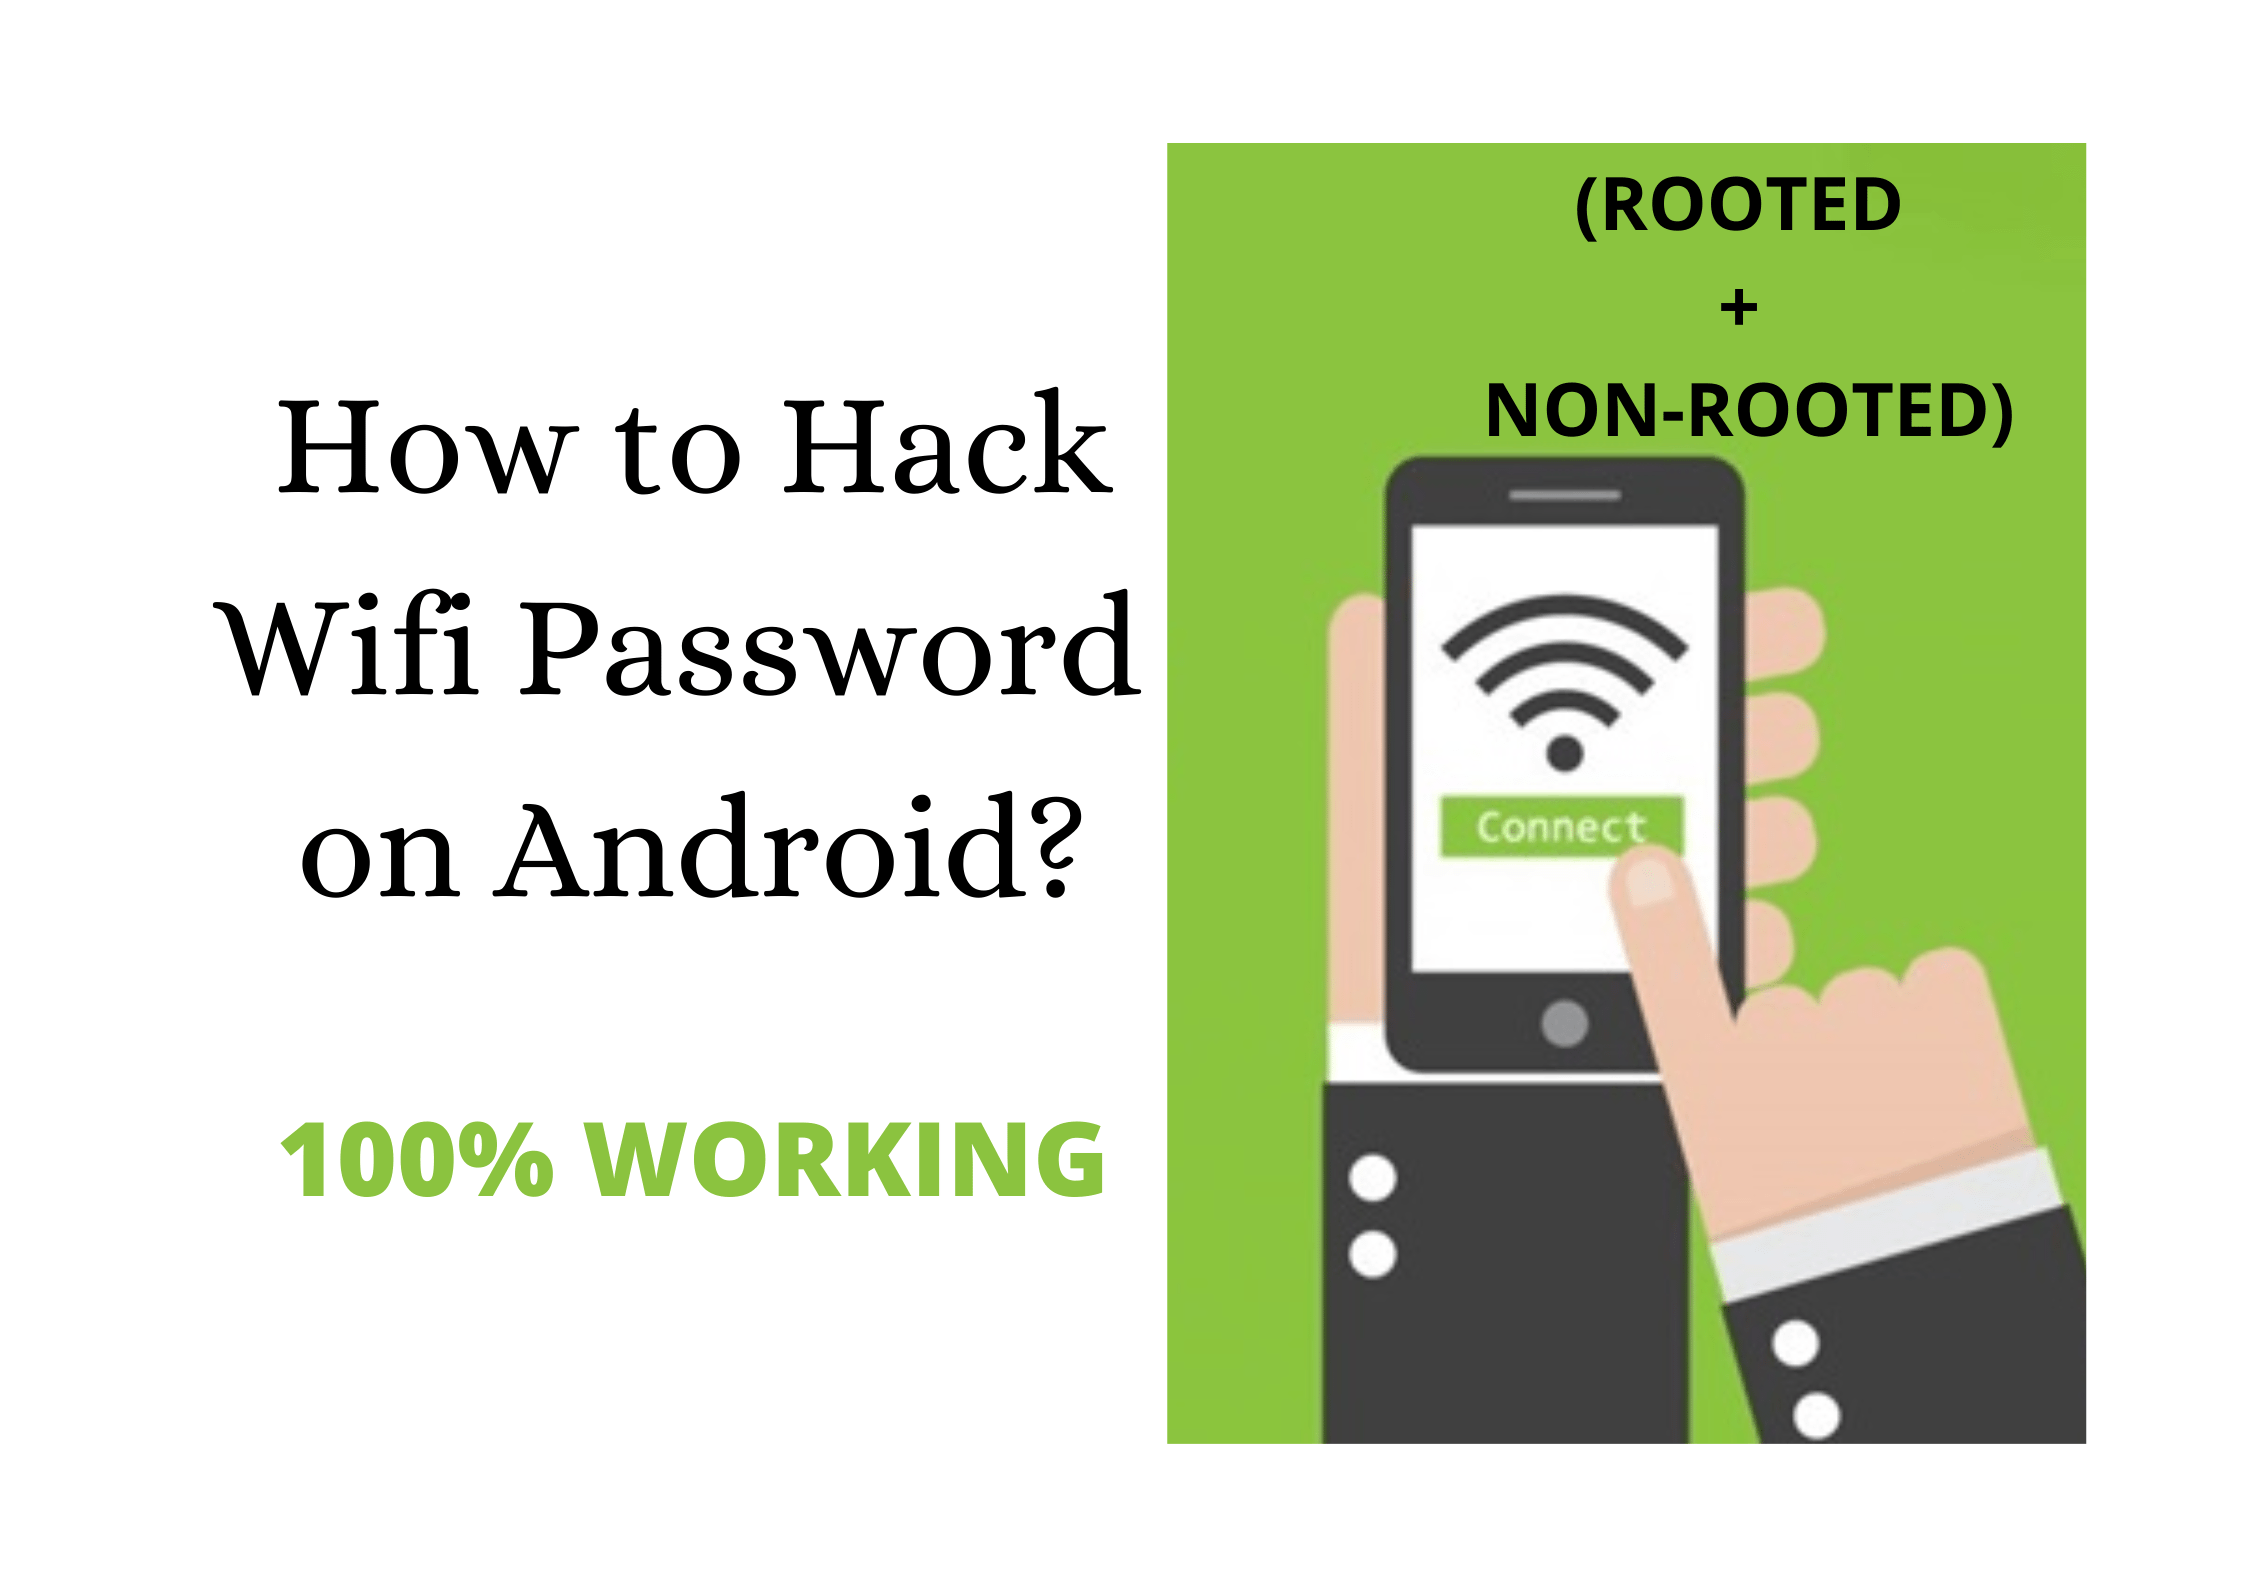 wifi password hacking tool for android